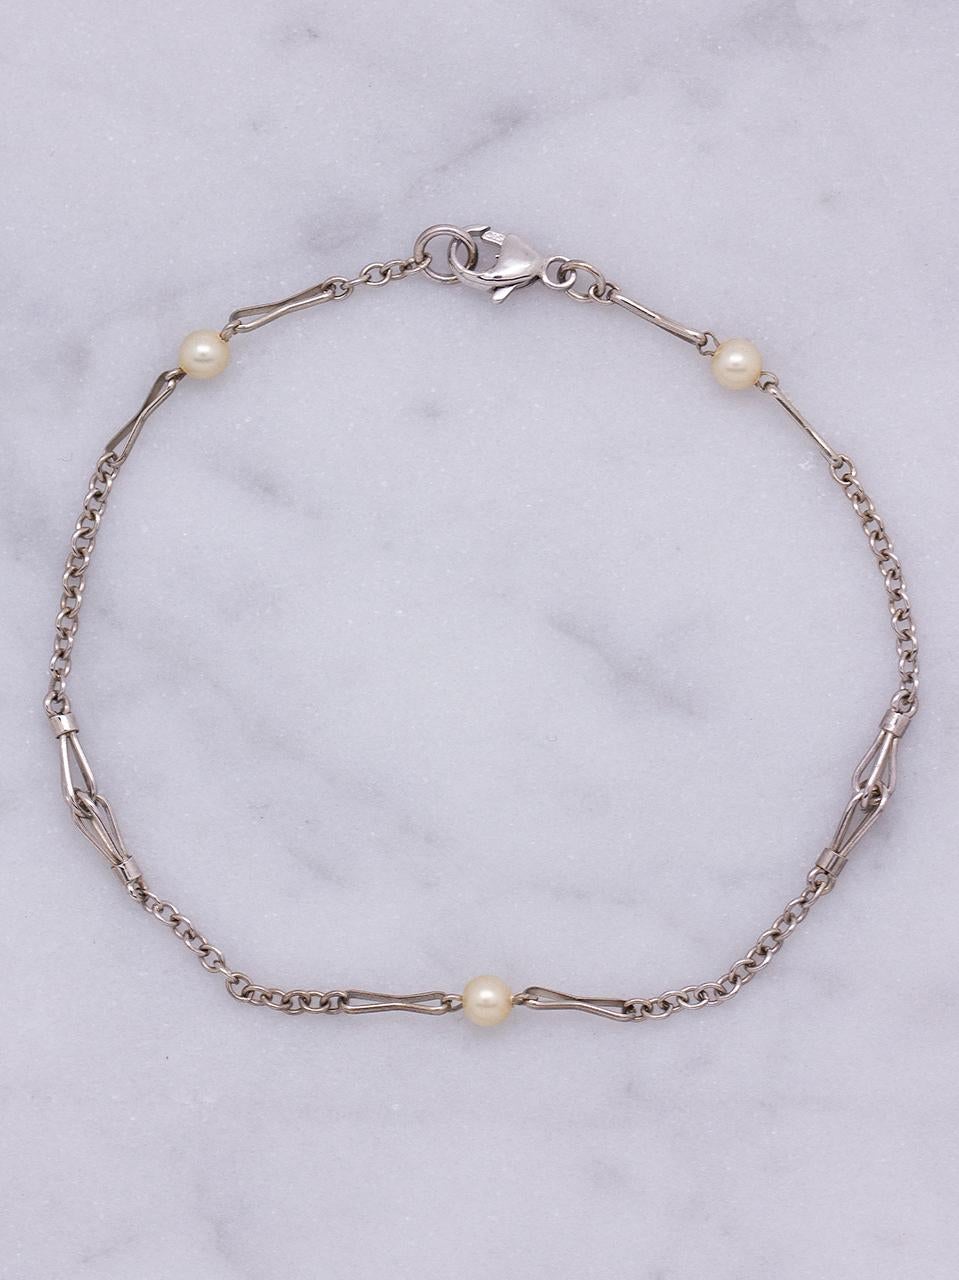 This dainty, feminine antique chain bracelet features three x 3.5mm off-white round pearls and elongated chain link is beautiful worn alone or layerd with other bracelets or even a wristwatch. The bracelet measures approximately 3mm wide and is